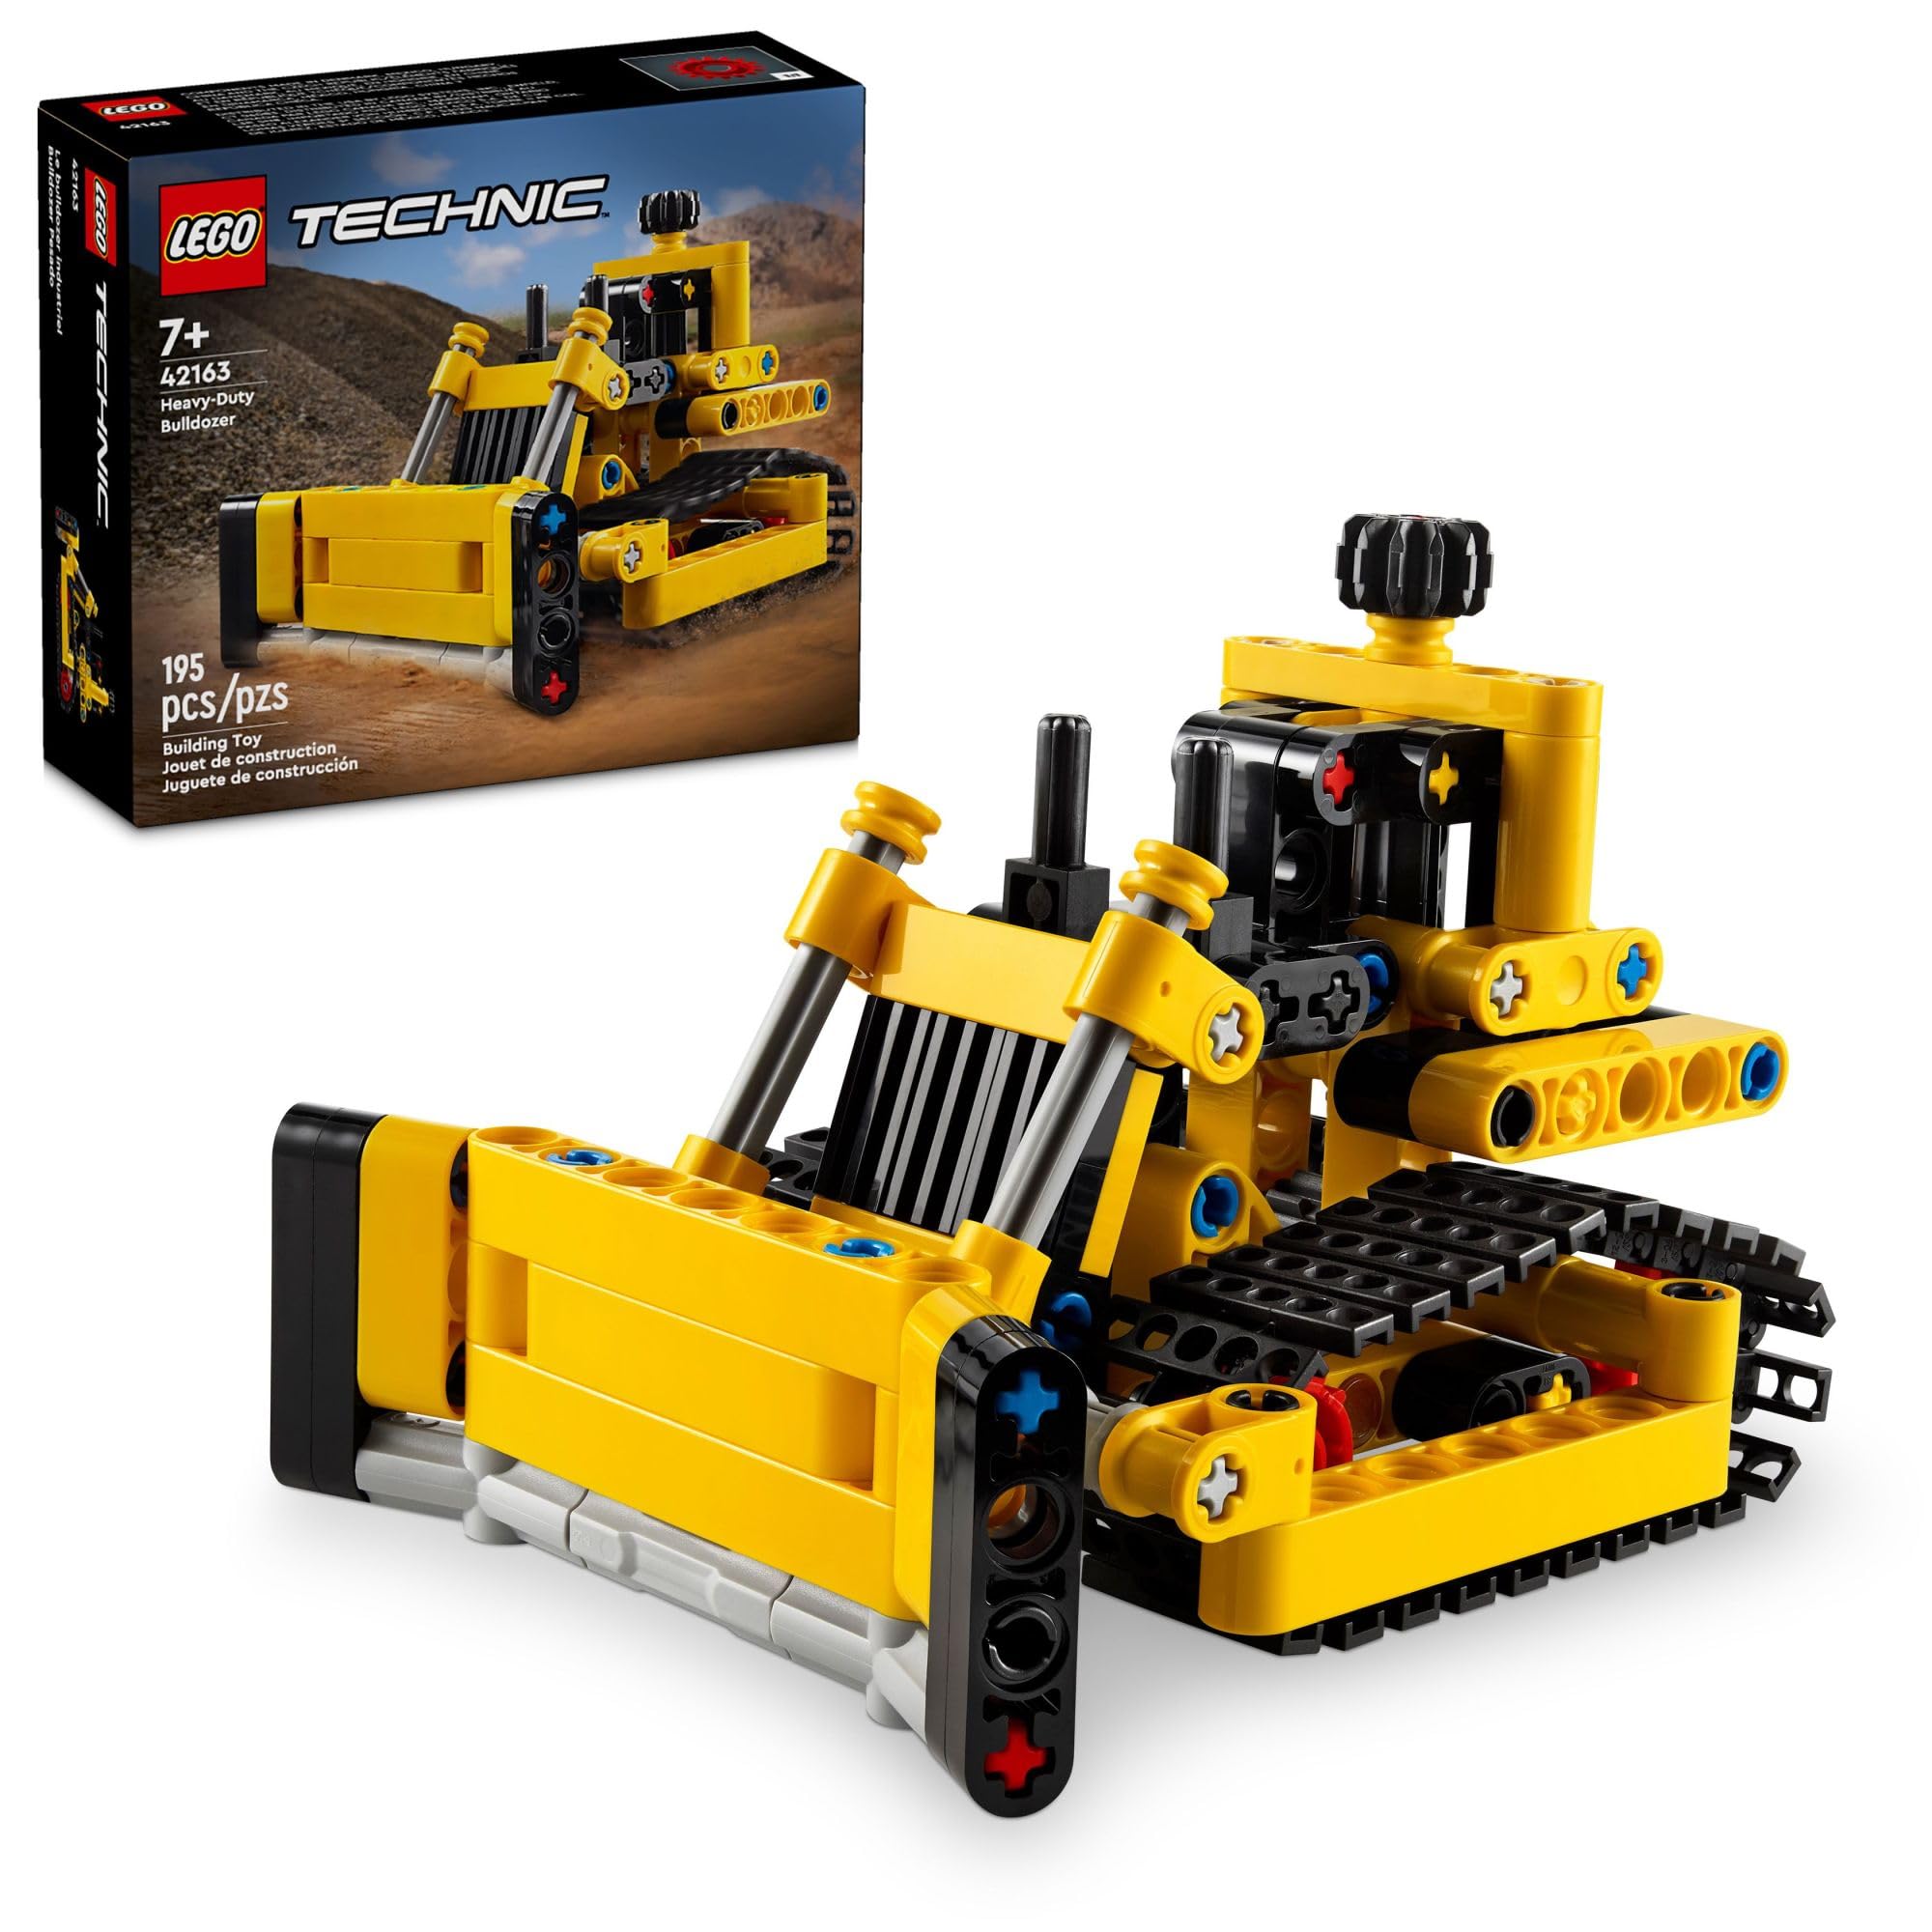 LEGO Technic Heavy-Duty Bulldozer Building Set, Kids’ Construction Toy, Vehicle Gift for Boys and Girls Ages 7 and Up, 42163, List Price is $12.99, Now Only $10.99, You Save $2